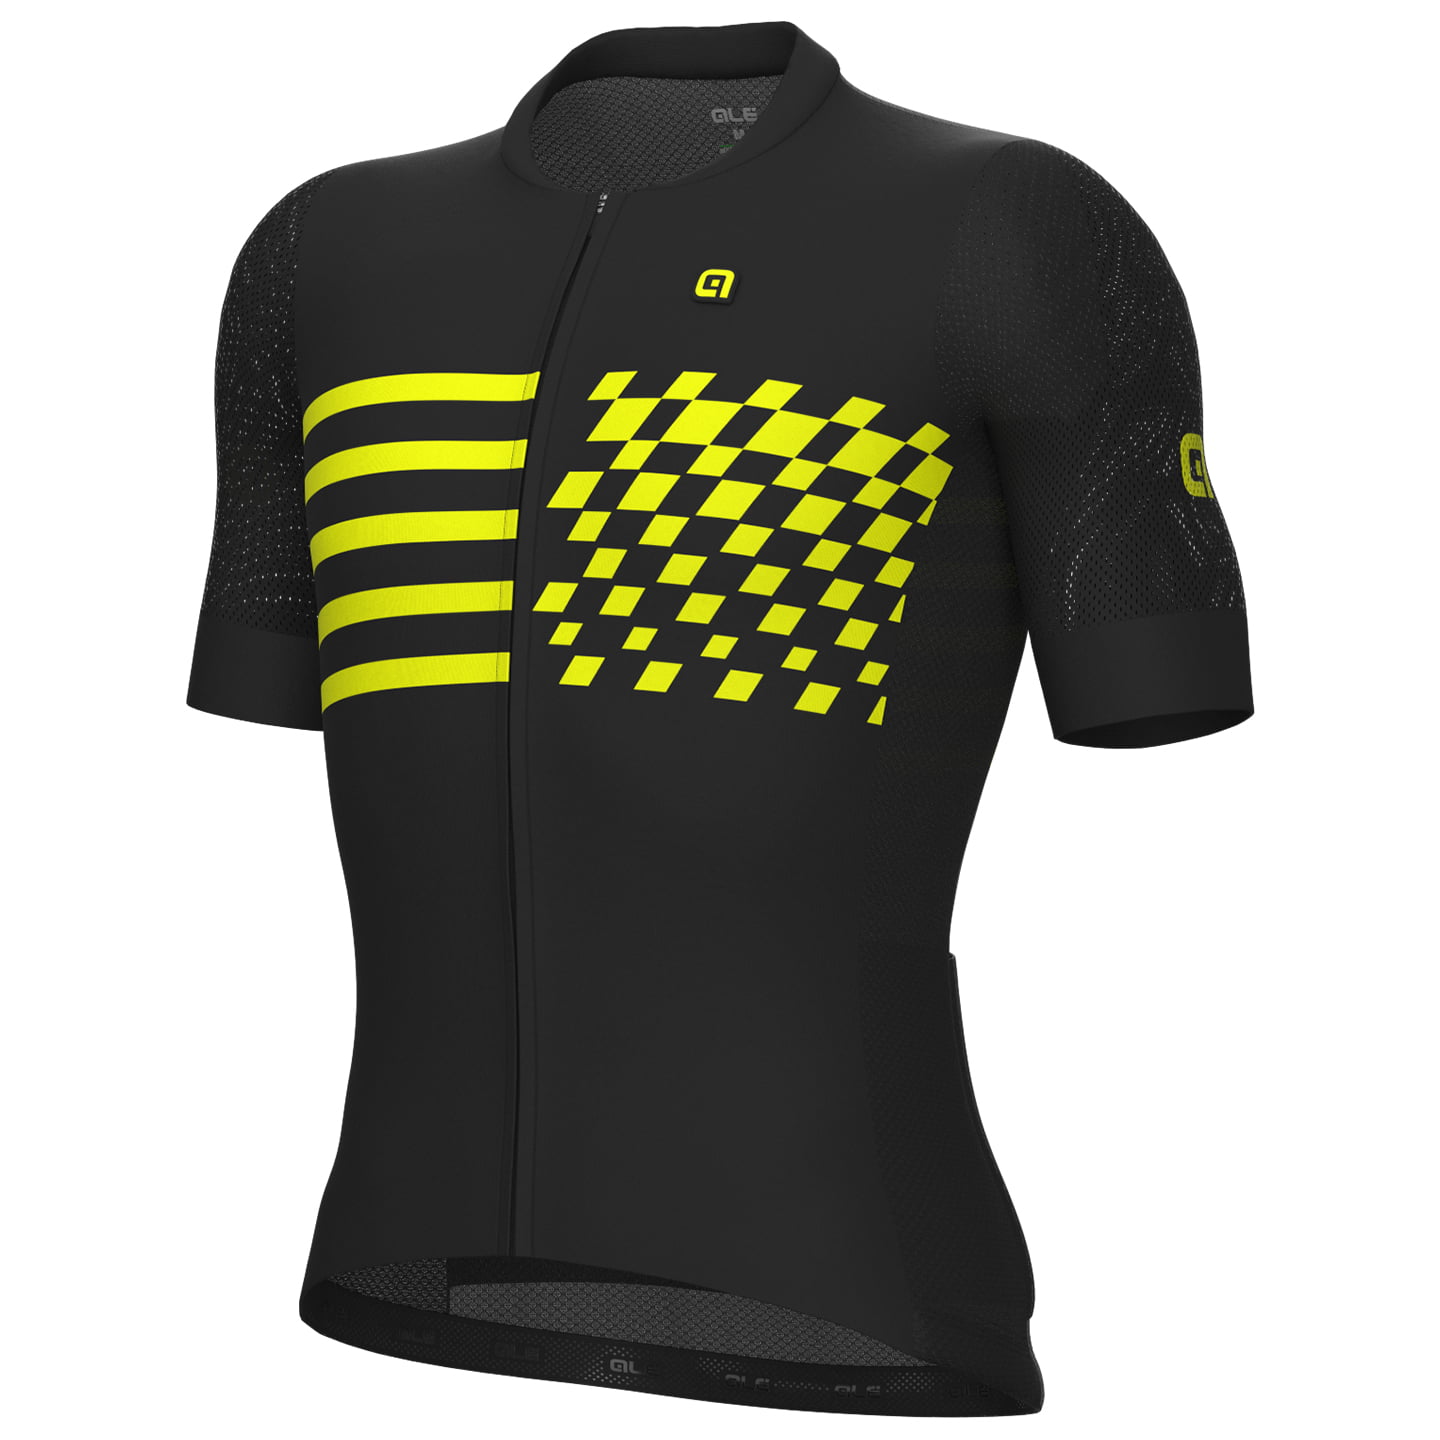 ALE Play Short Sleeve Jersey, for men, size L, Cycling jersey, Cycling clothing